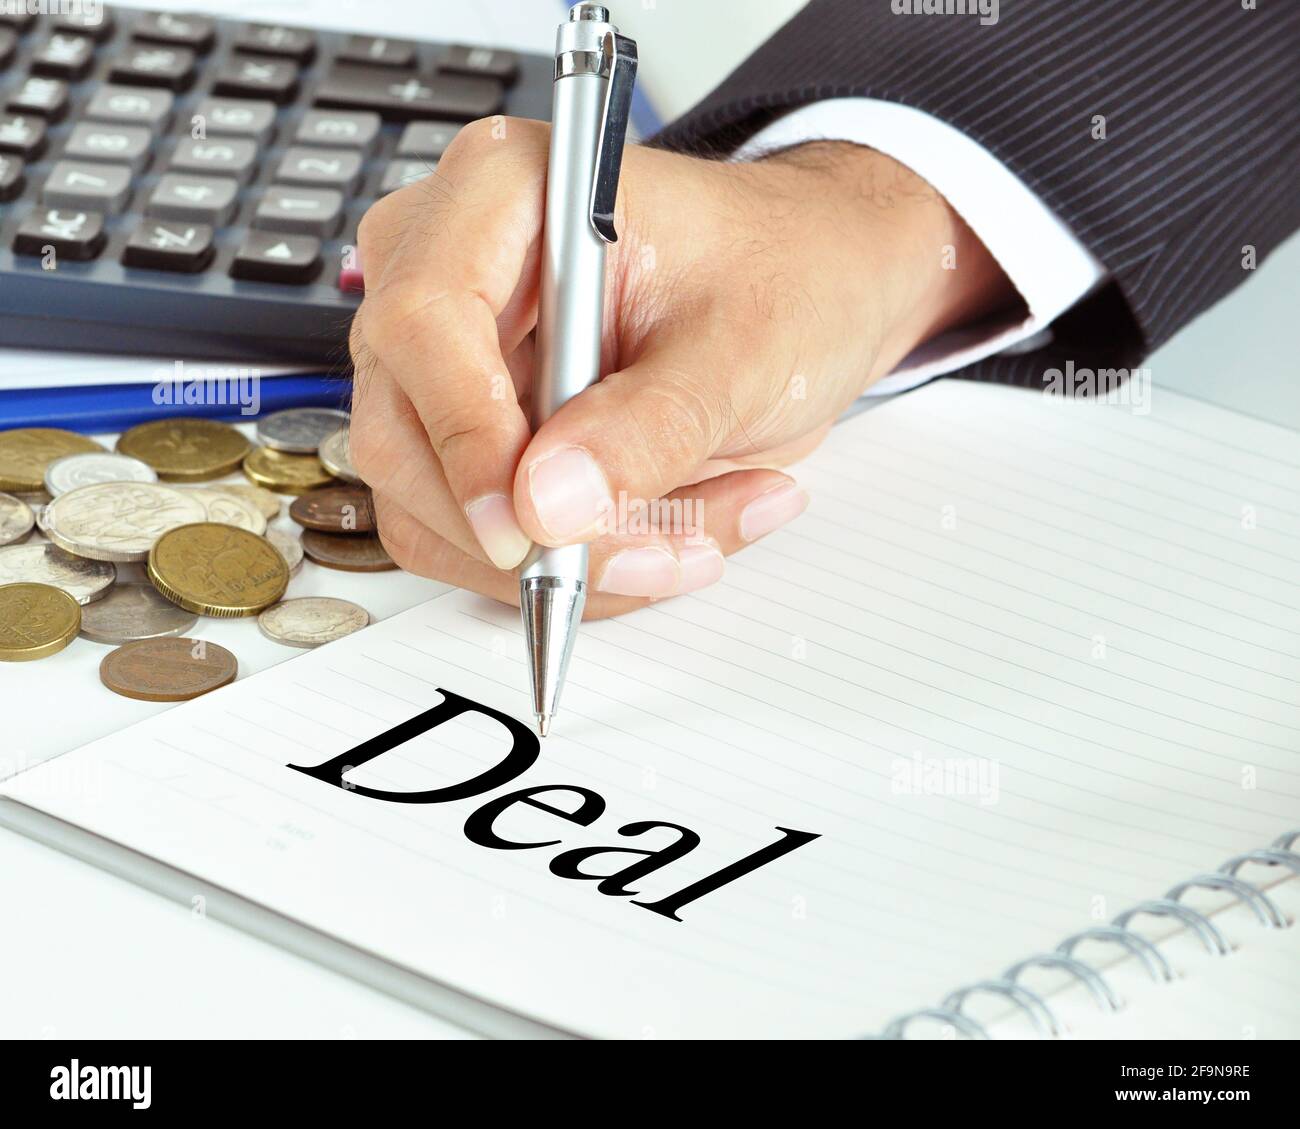 Businessman hand holding a pen pointing to Deal word on the paper - commercial & business concept Stock Photo